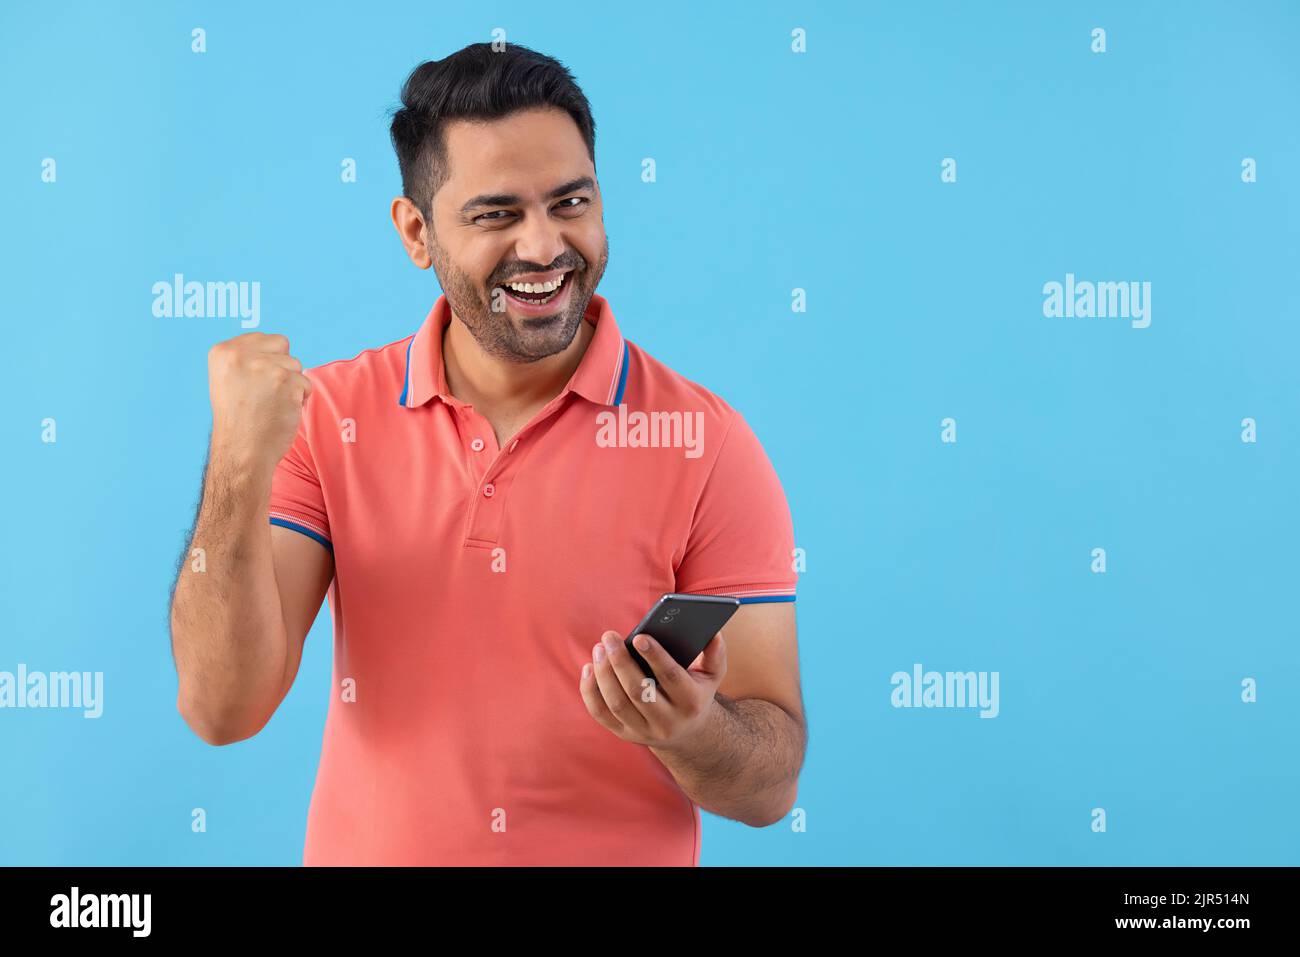 Happy young man cheering with raising his fist while using Smartphone Stock Photo